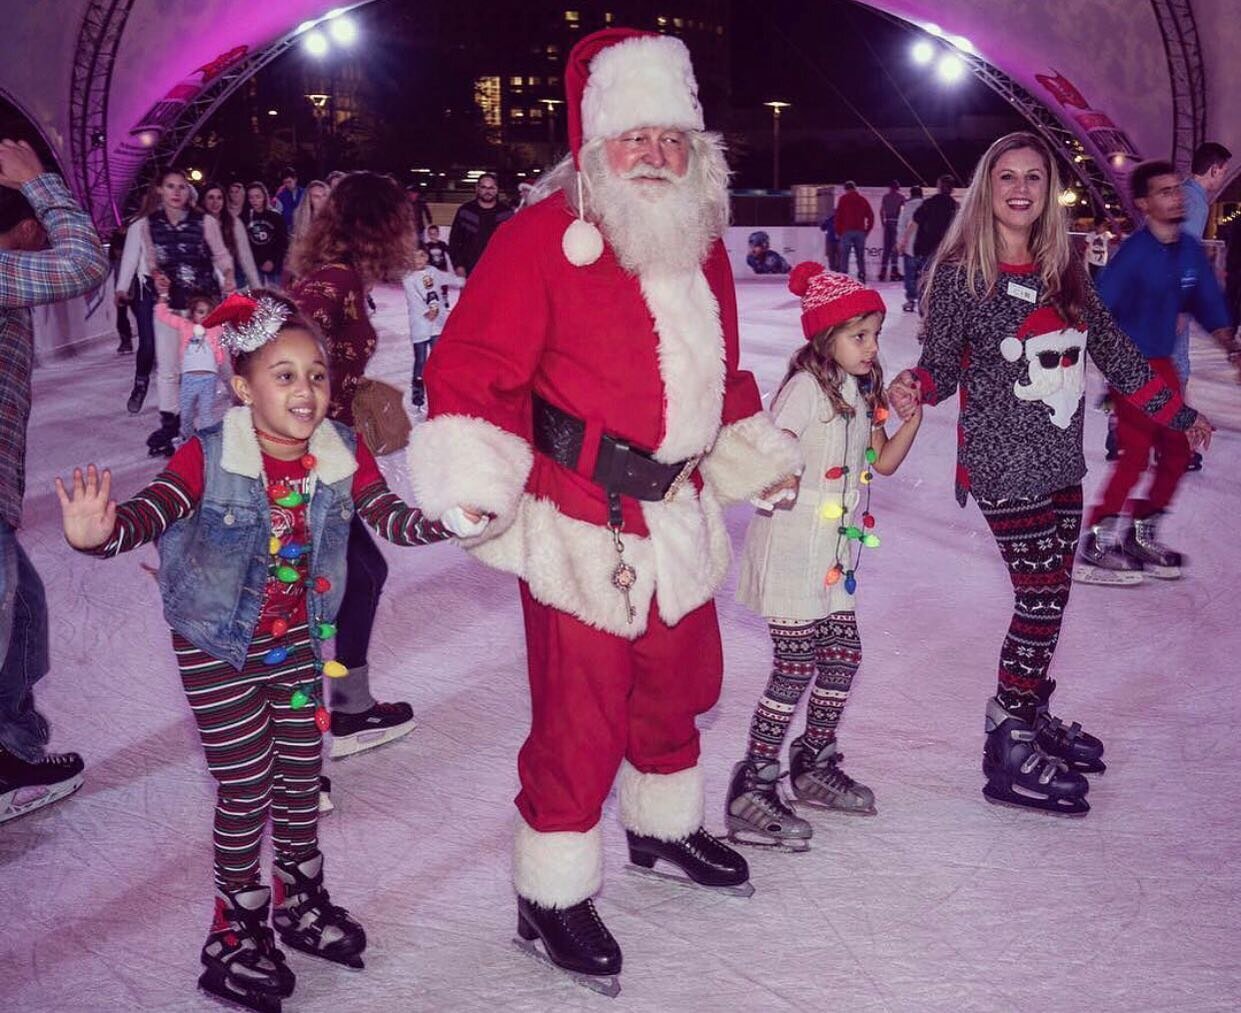 #fbf to when Santa got on the ice at @wintervillagetampa 🎅⛸

#FourthFridayTPA takes #WinterVillageTampa, presented by the @tblightning, TONIGHT and we want to see your best ugly Christmas sweater 🎄

See you at the Information Hub beginning at 5pm!